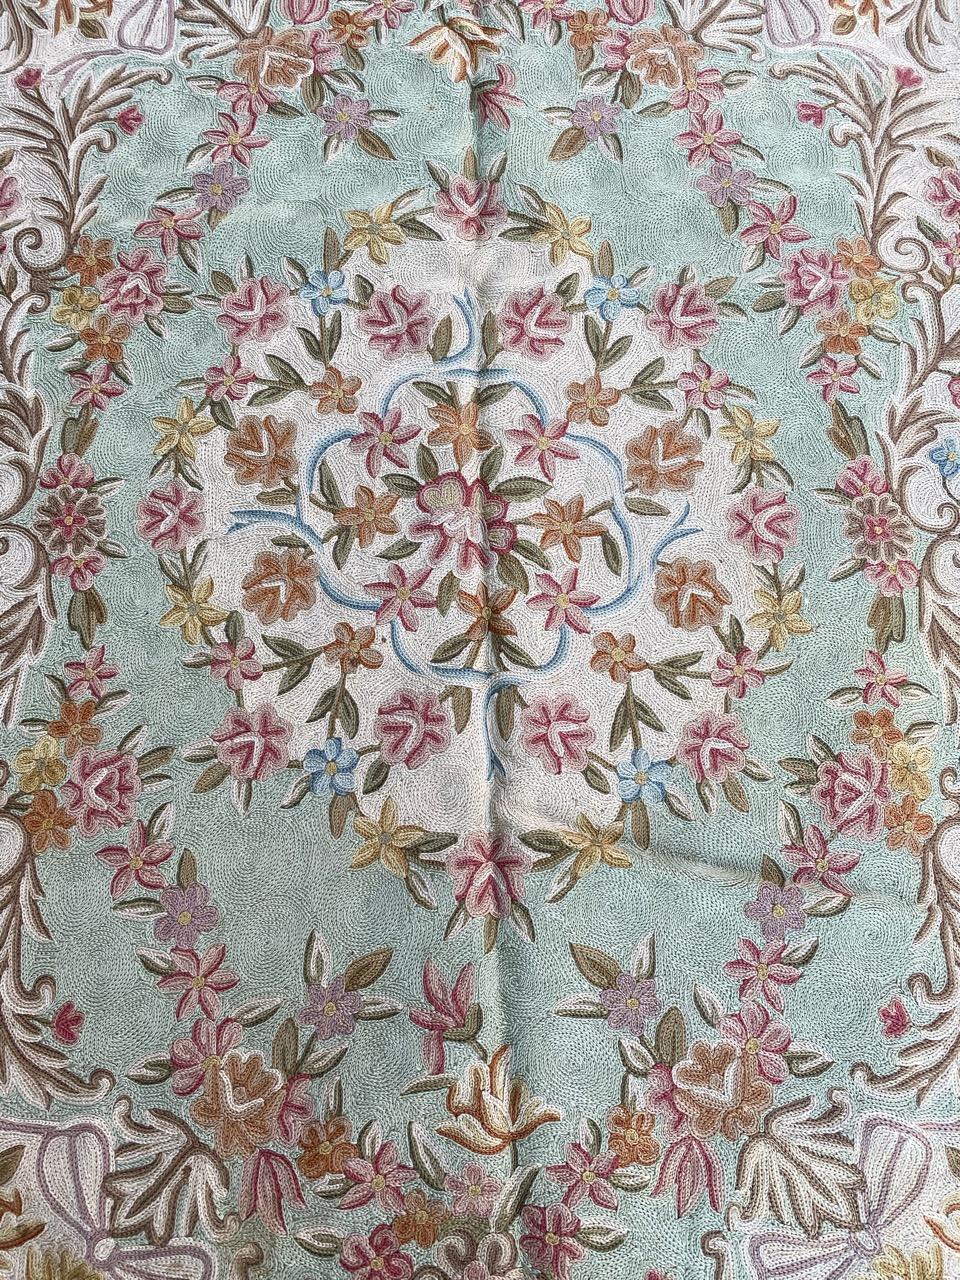 Little vintage Aubusson style embroidered rug with floral design and nice colors, wool.